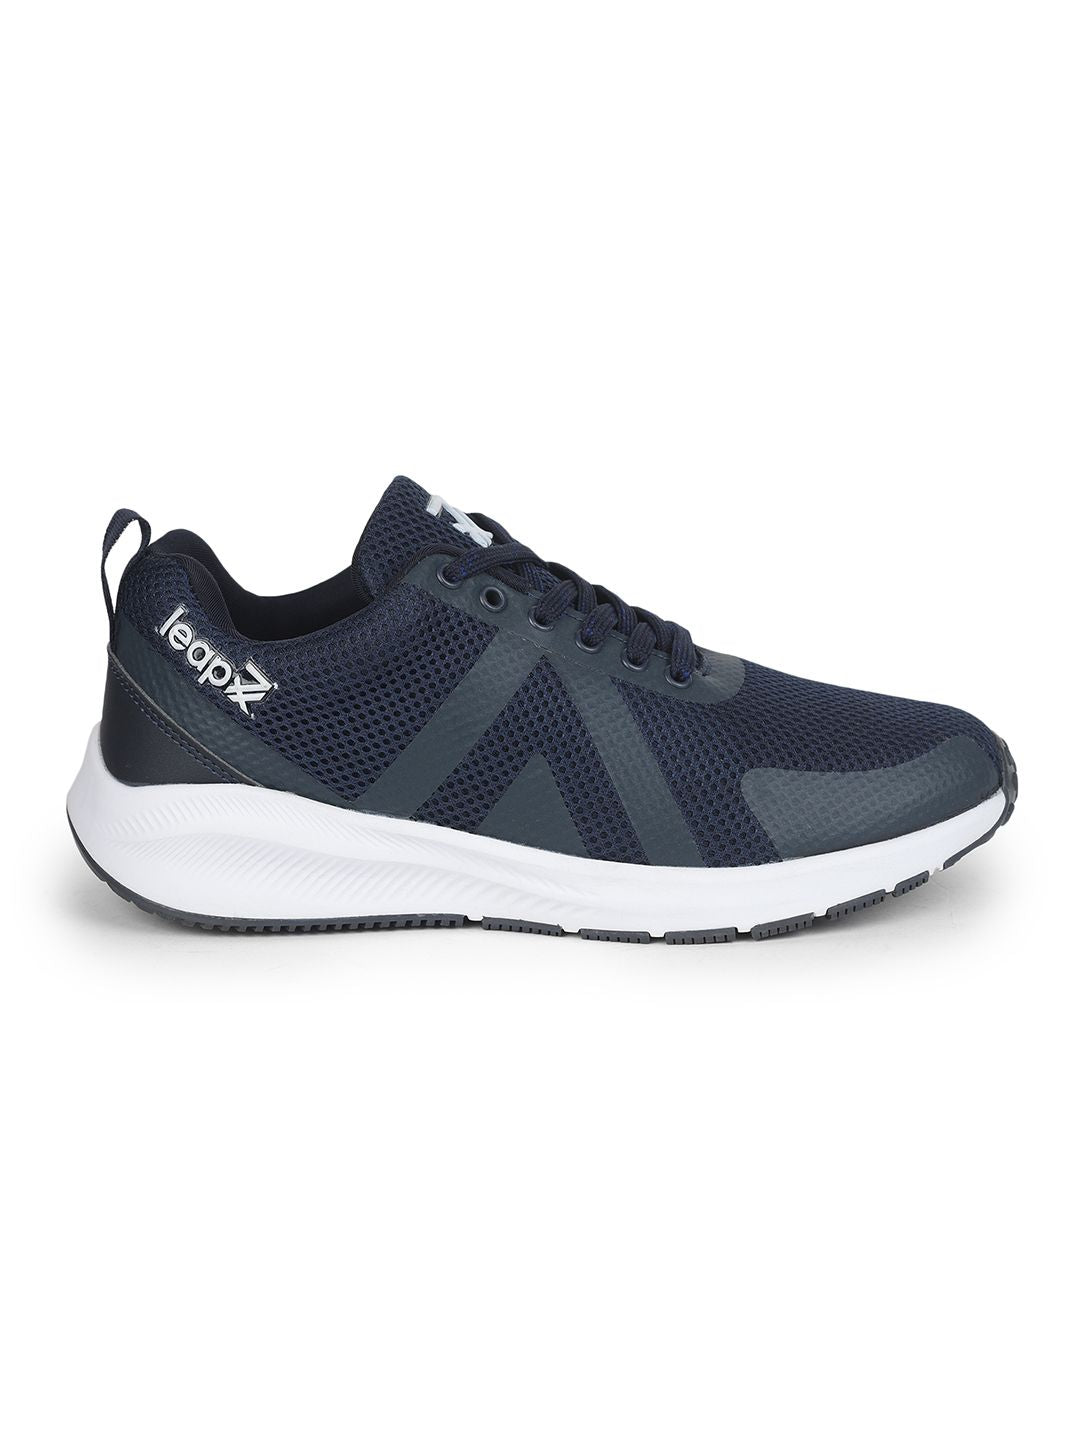 LEAP7X By Liberty Sports Shoes For MENS (60580021) | Book Bargain Buy